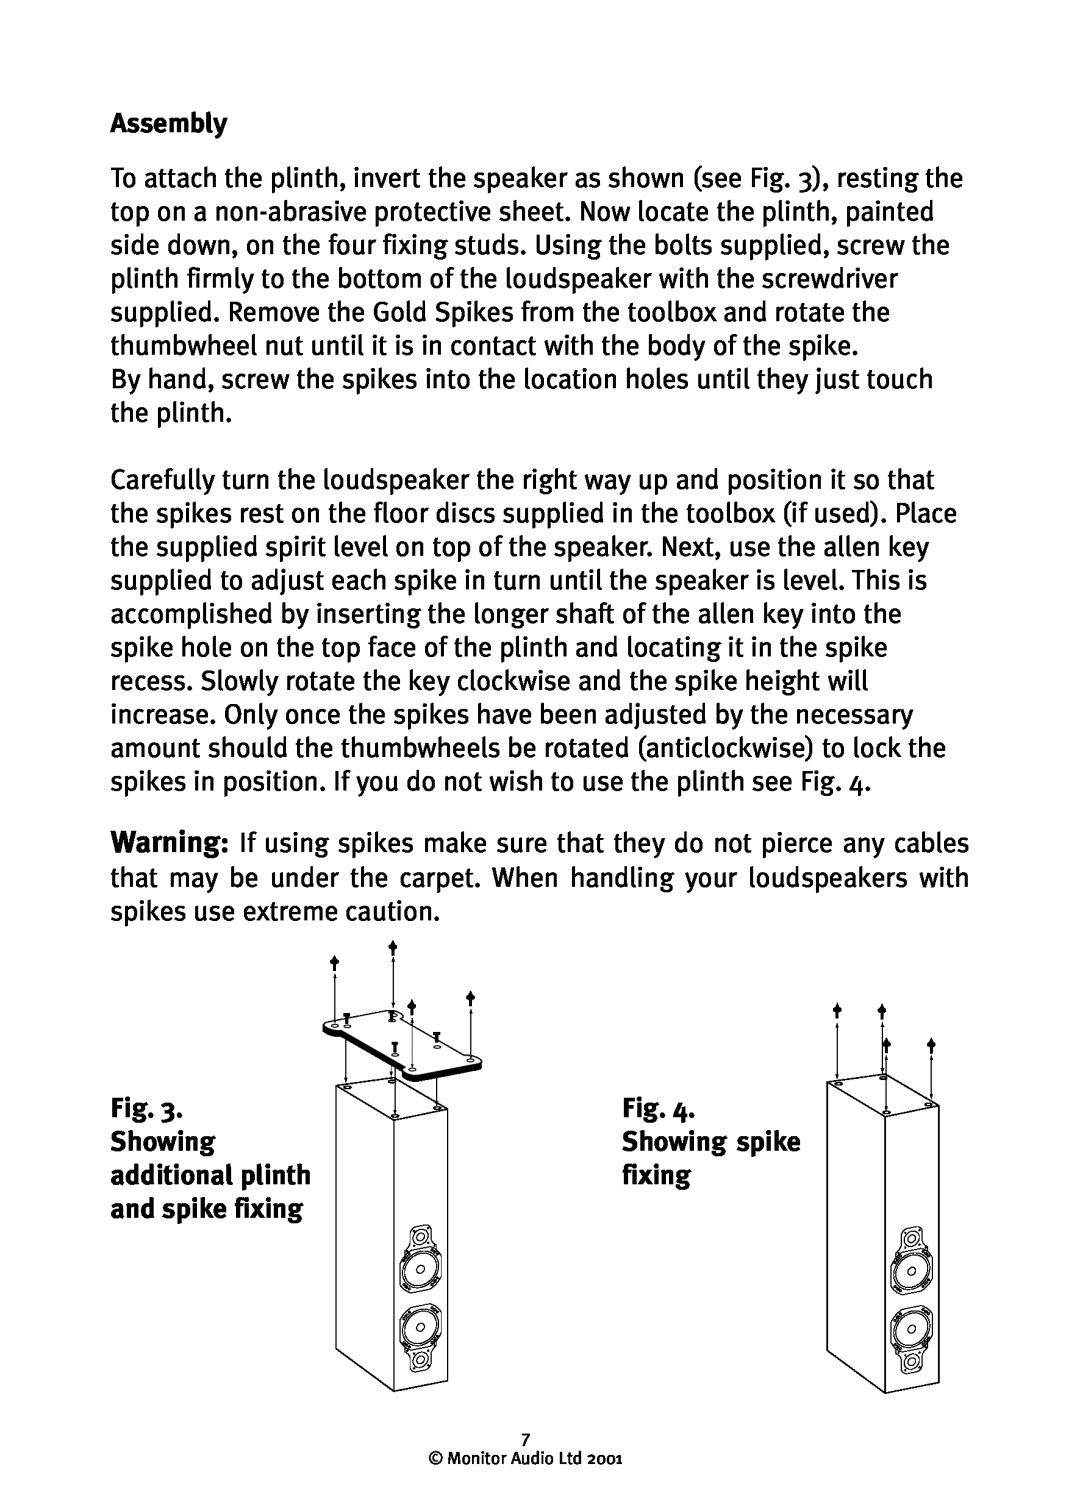 Monitor Audio GR10 owner manual Assembly, Showing spike fixing 